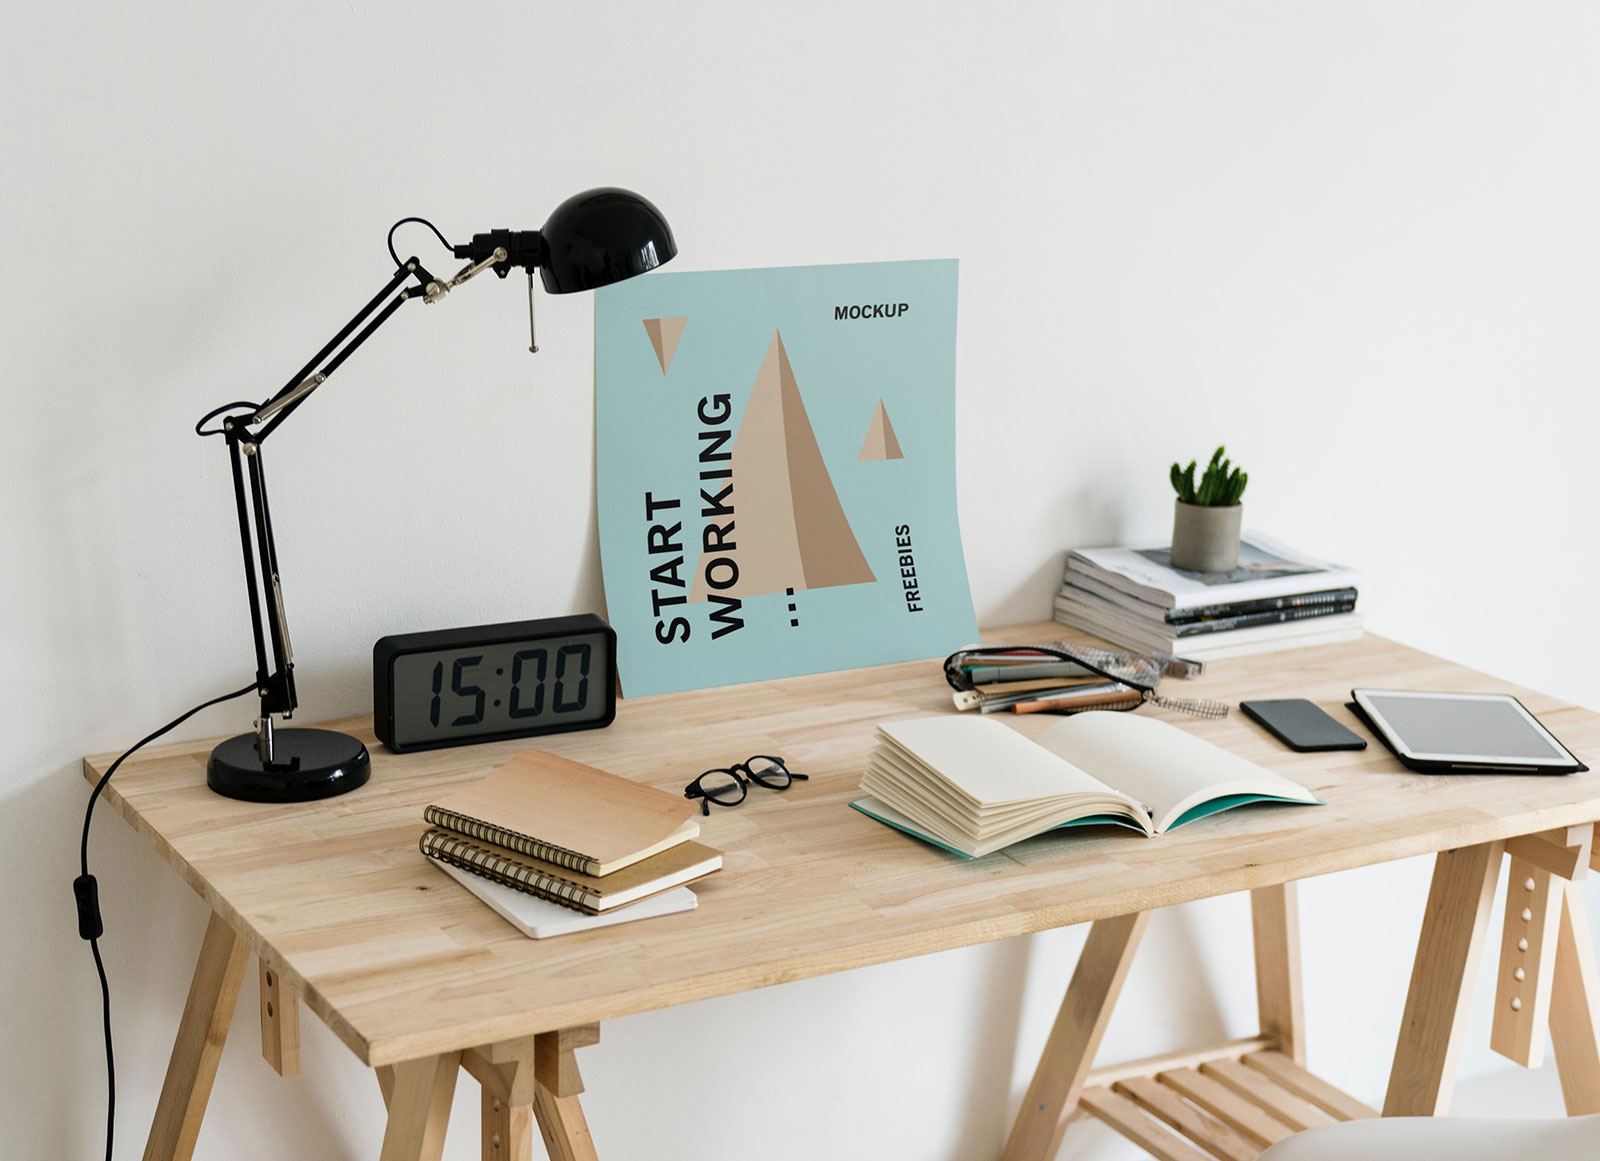 Free-Poster-on-Workplace-Mockup-PSD